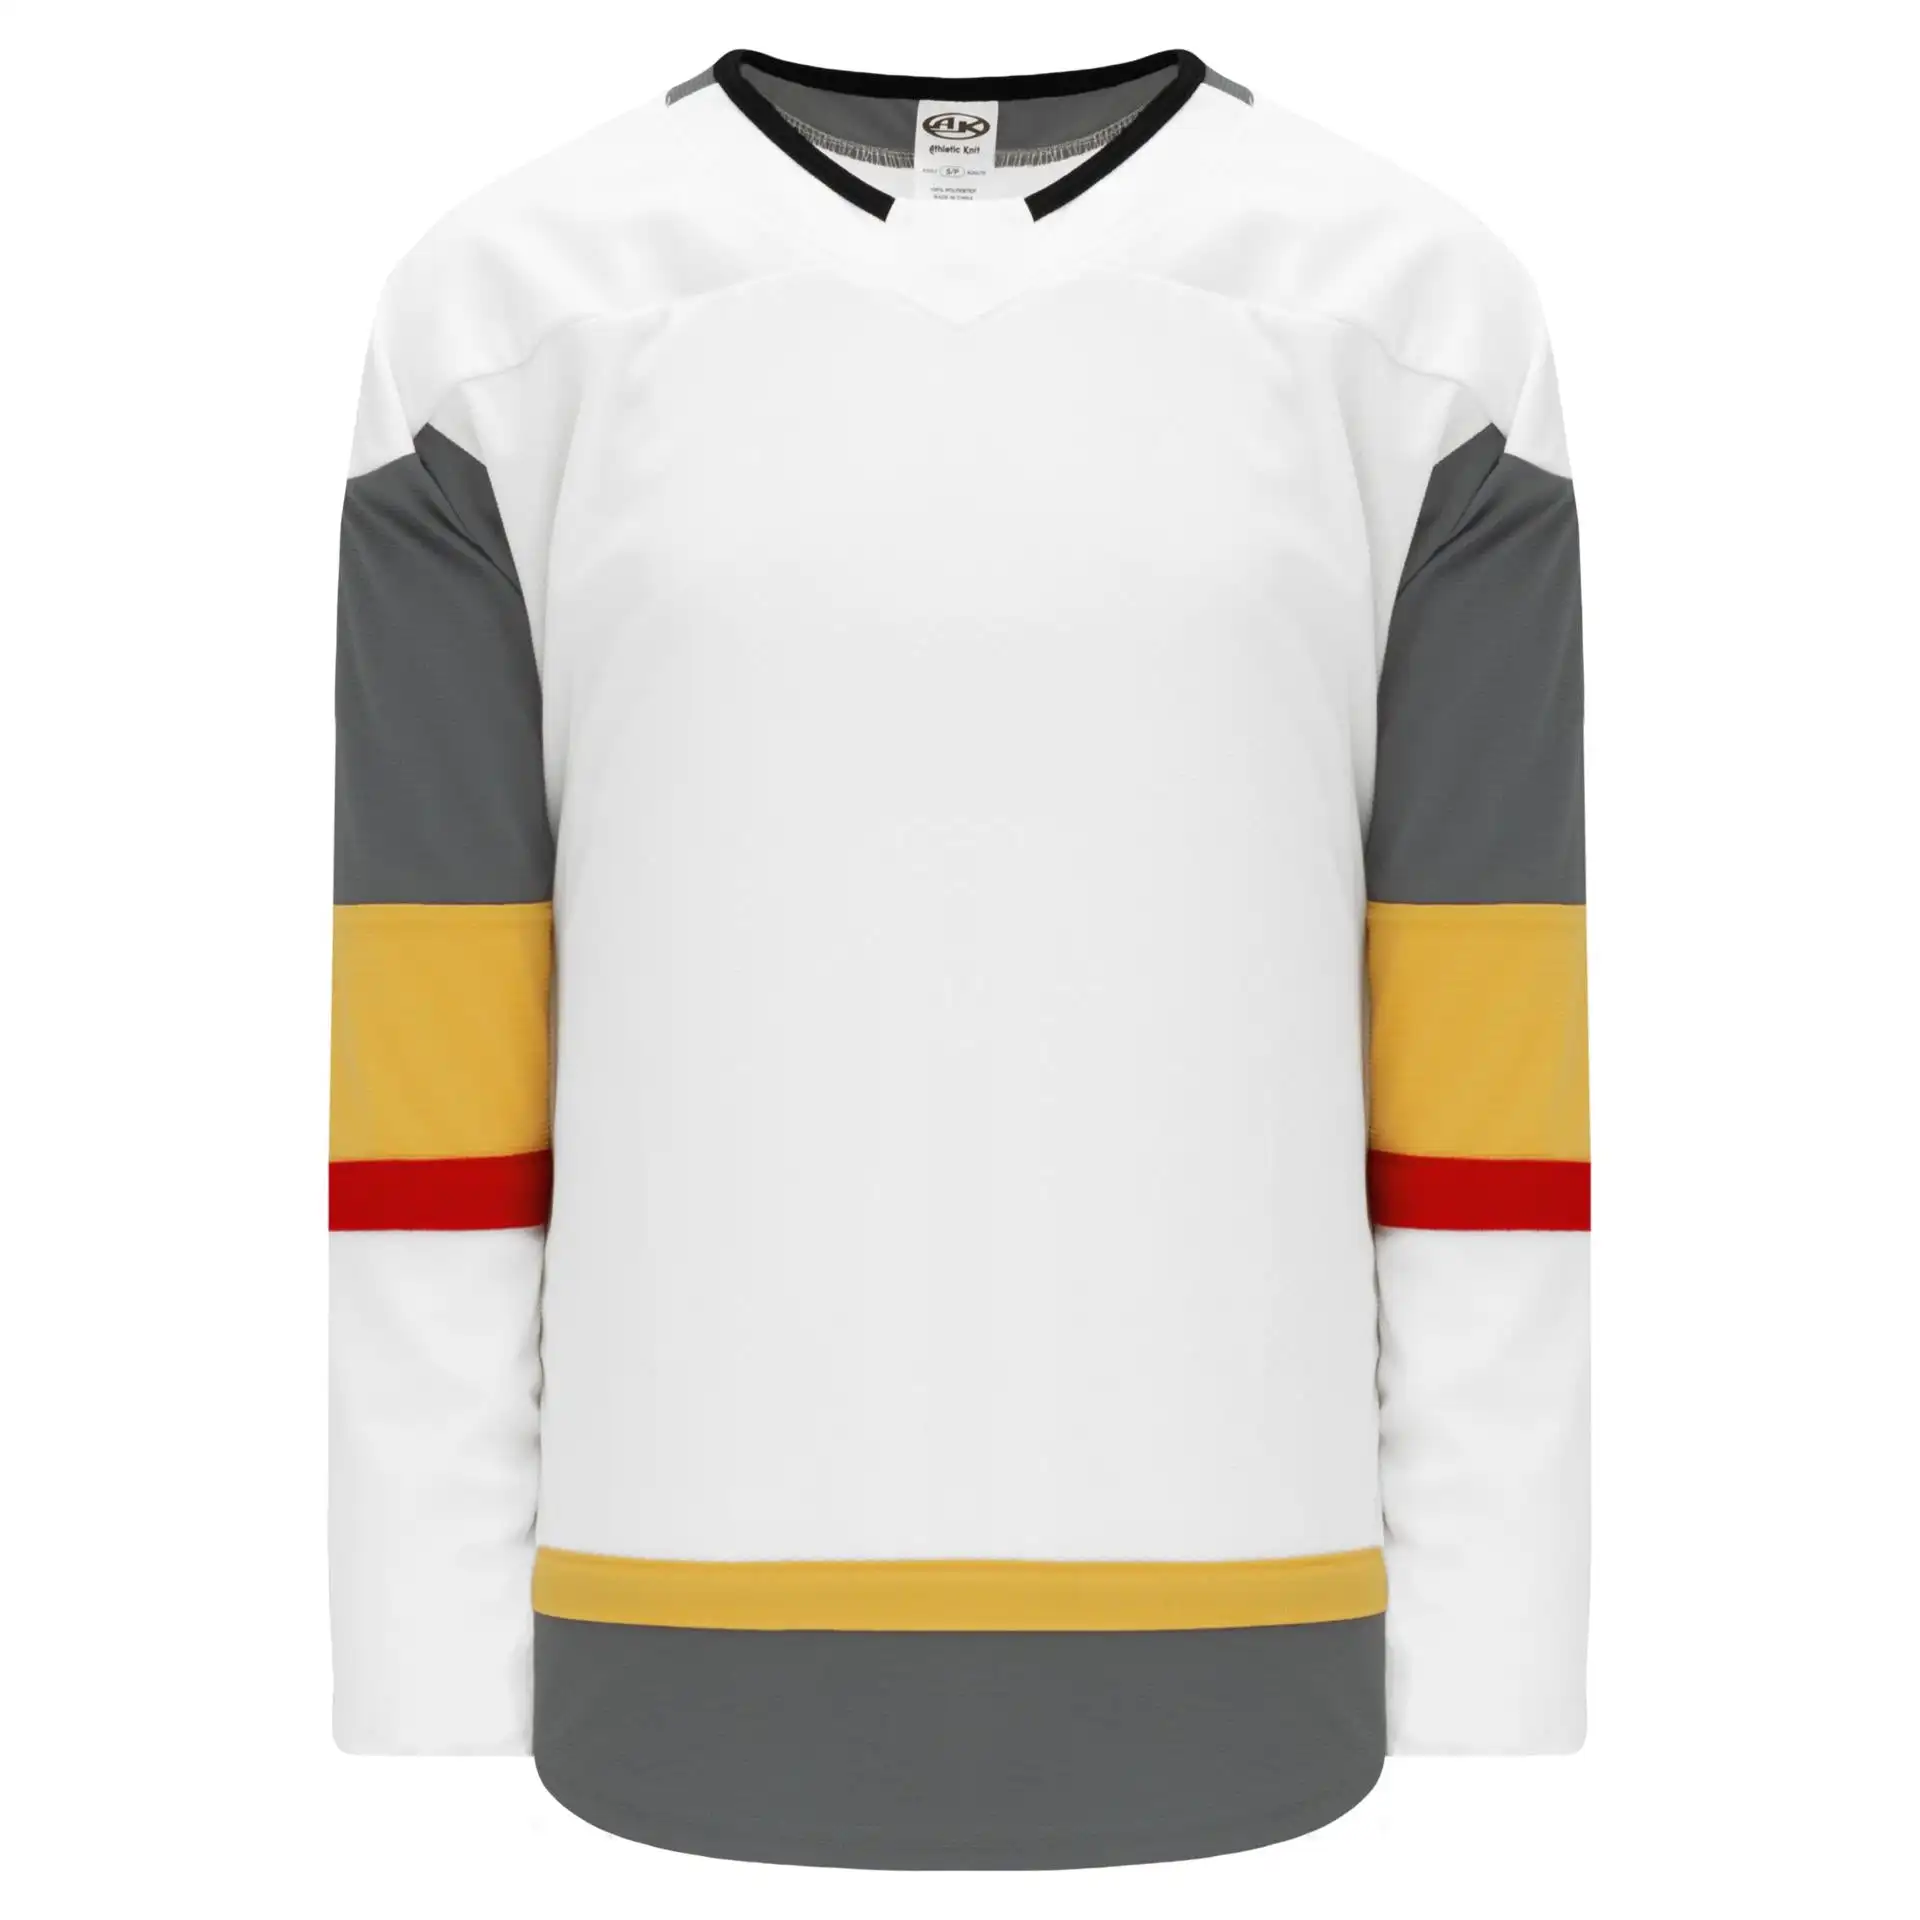 

Fashion Personalized Customtize Ice Hockey Jerseys Printed Team Name Number Training Shirt Team Sports for Men Women Youth